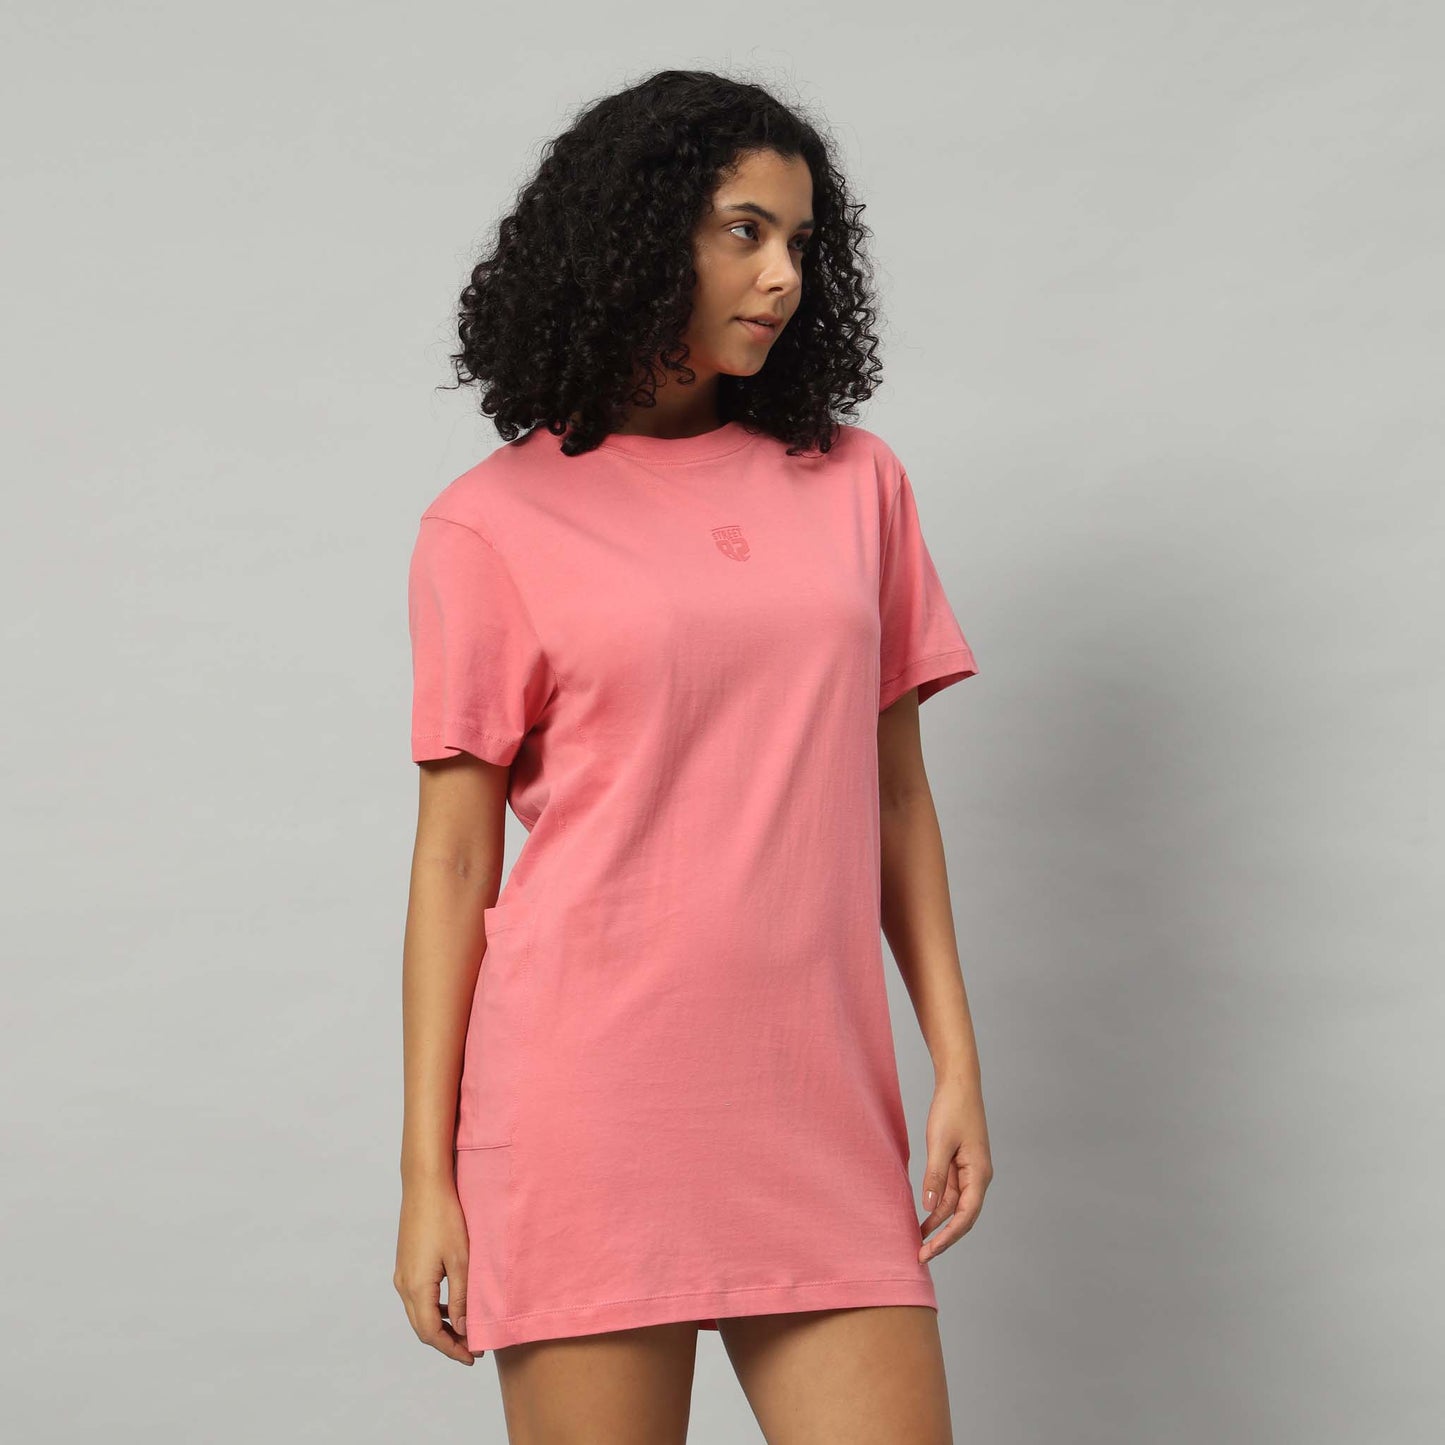 Ladies T-shirt Dress with Pockets